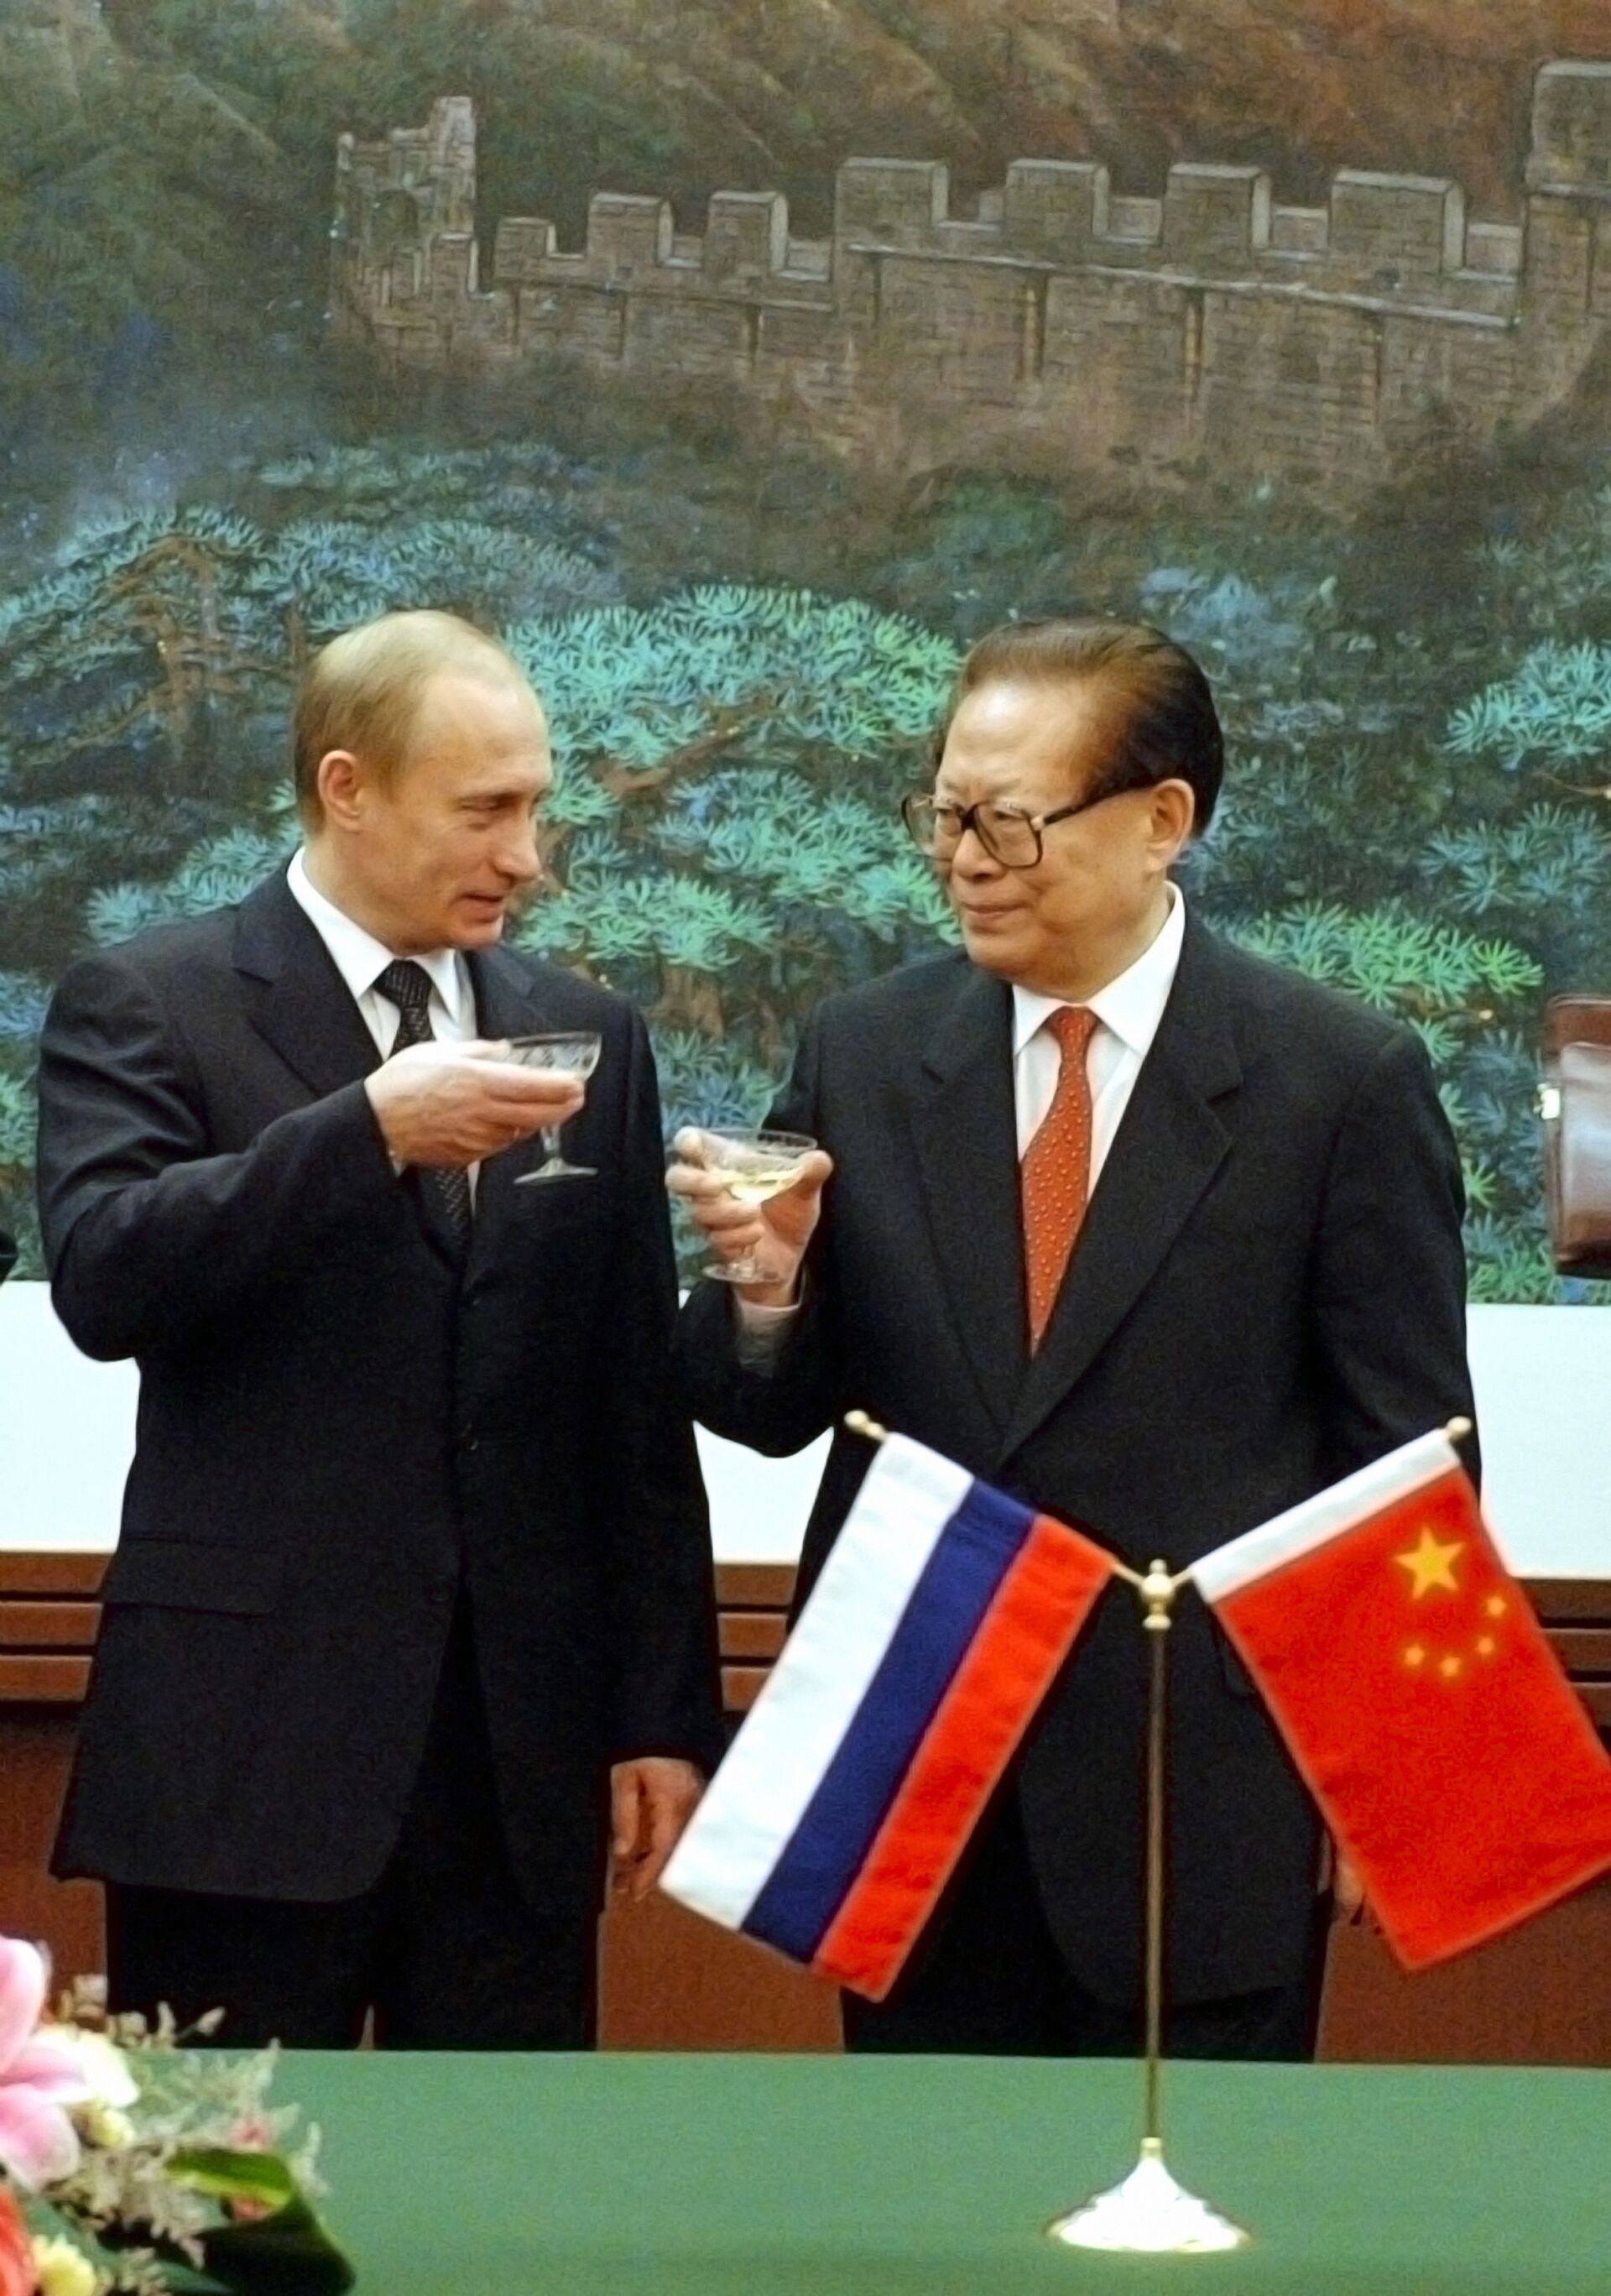 Putin, Xi Officially Announce Extension of Chinese-Russian Friendship, Cooperation Deal - Sputnik International, 1920, 28.06.2021